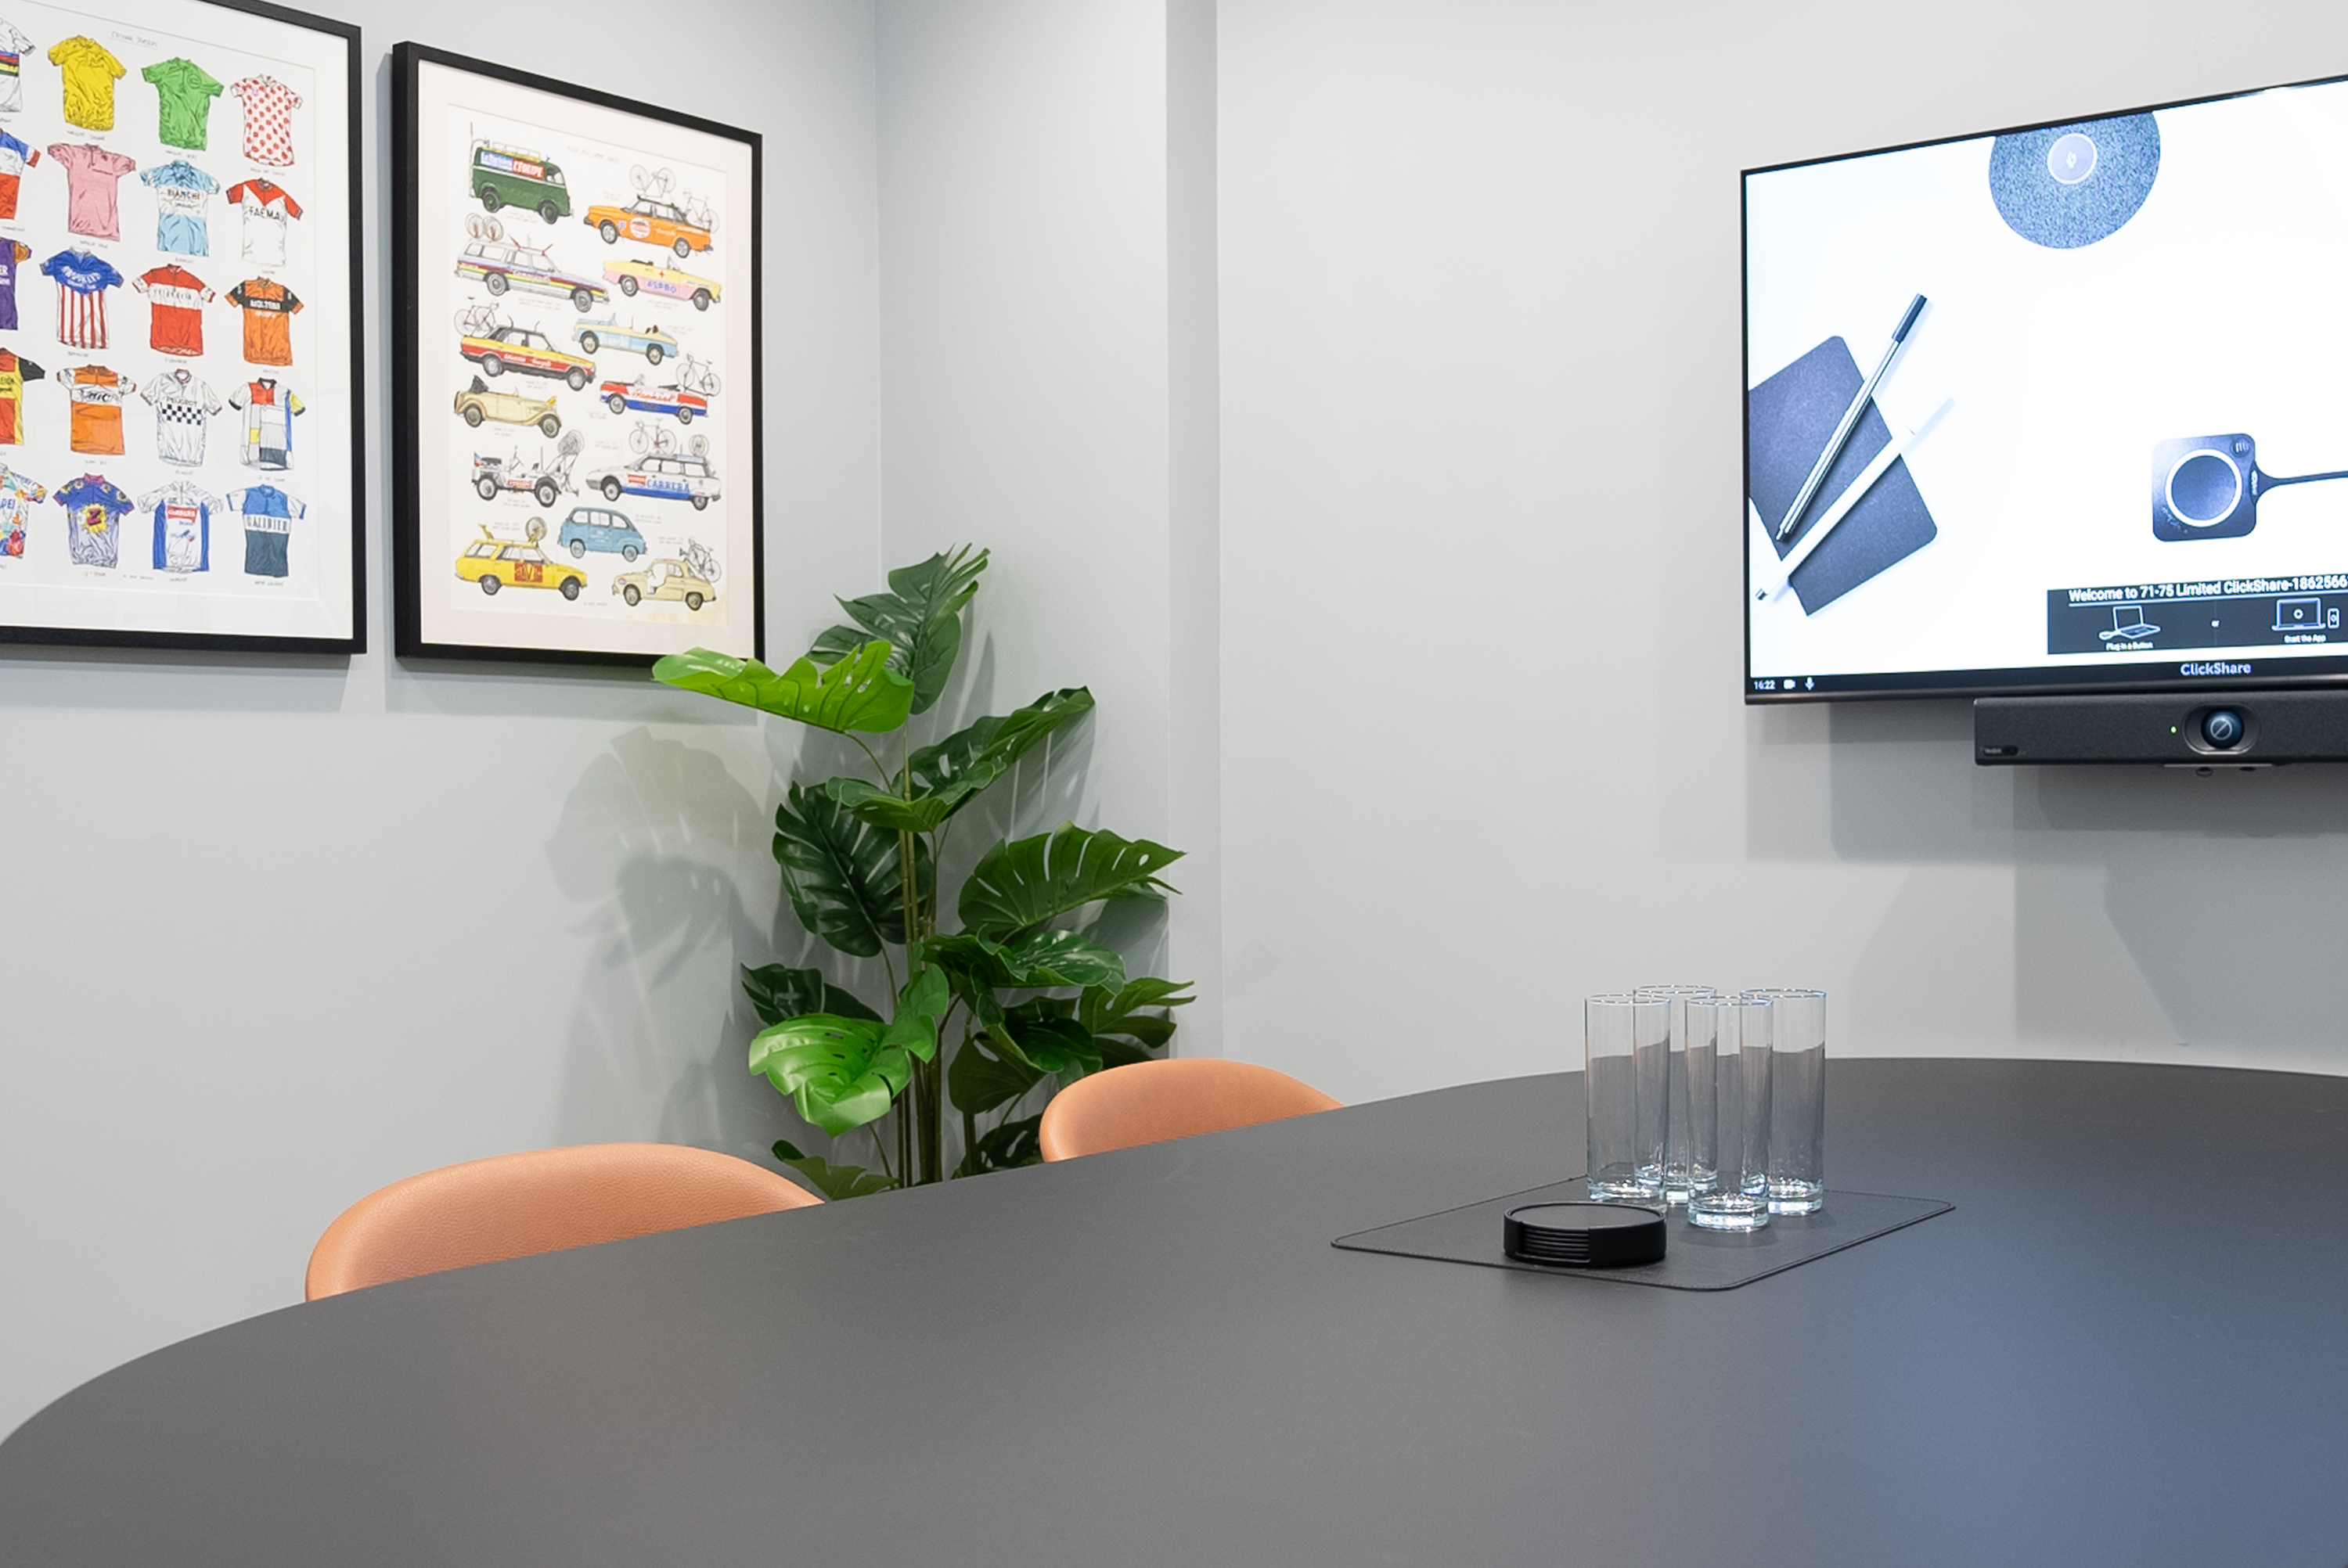 Meeting room with light grey walls and concrete floor, black meeting table, 4 brown tub chairs, large display screen with video conferencing unit, black credenza with tea and coffee accessories, and framed photographs hanging on wall.